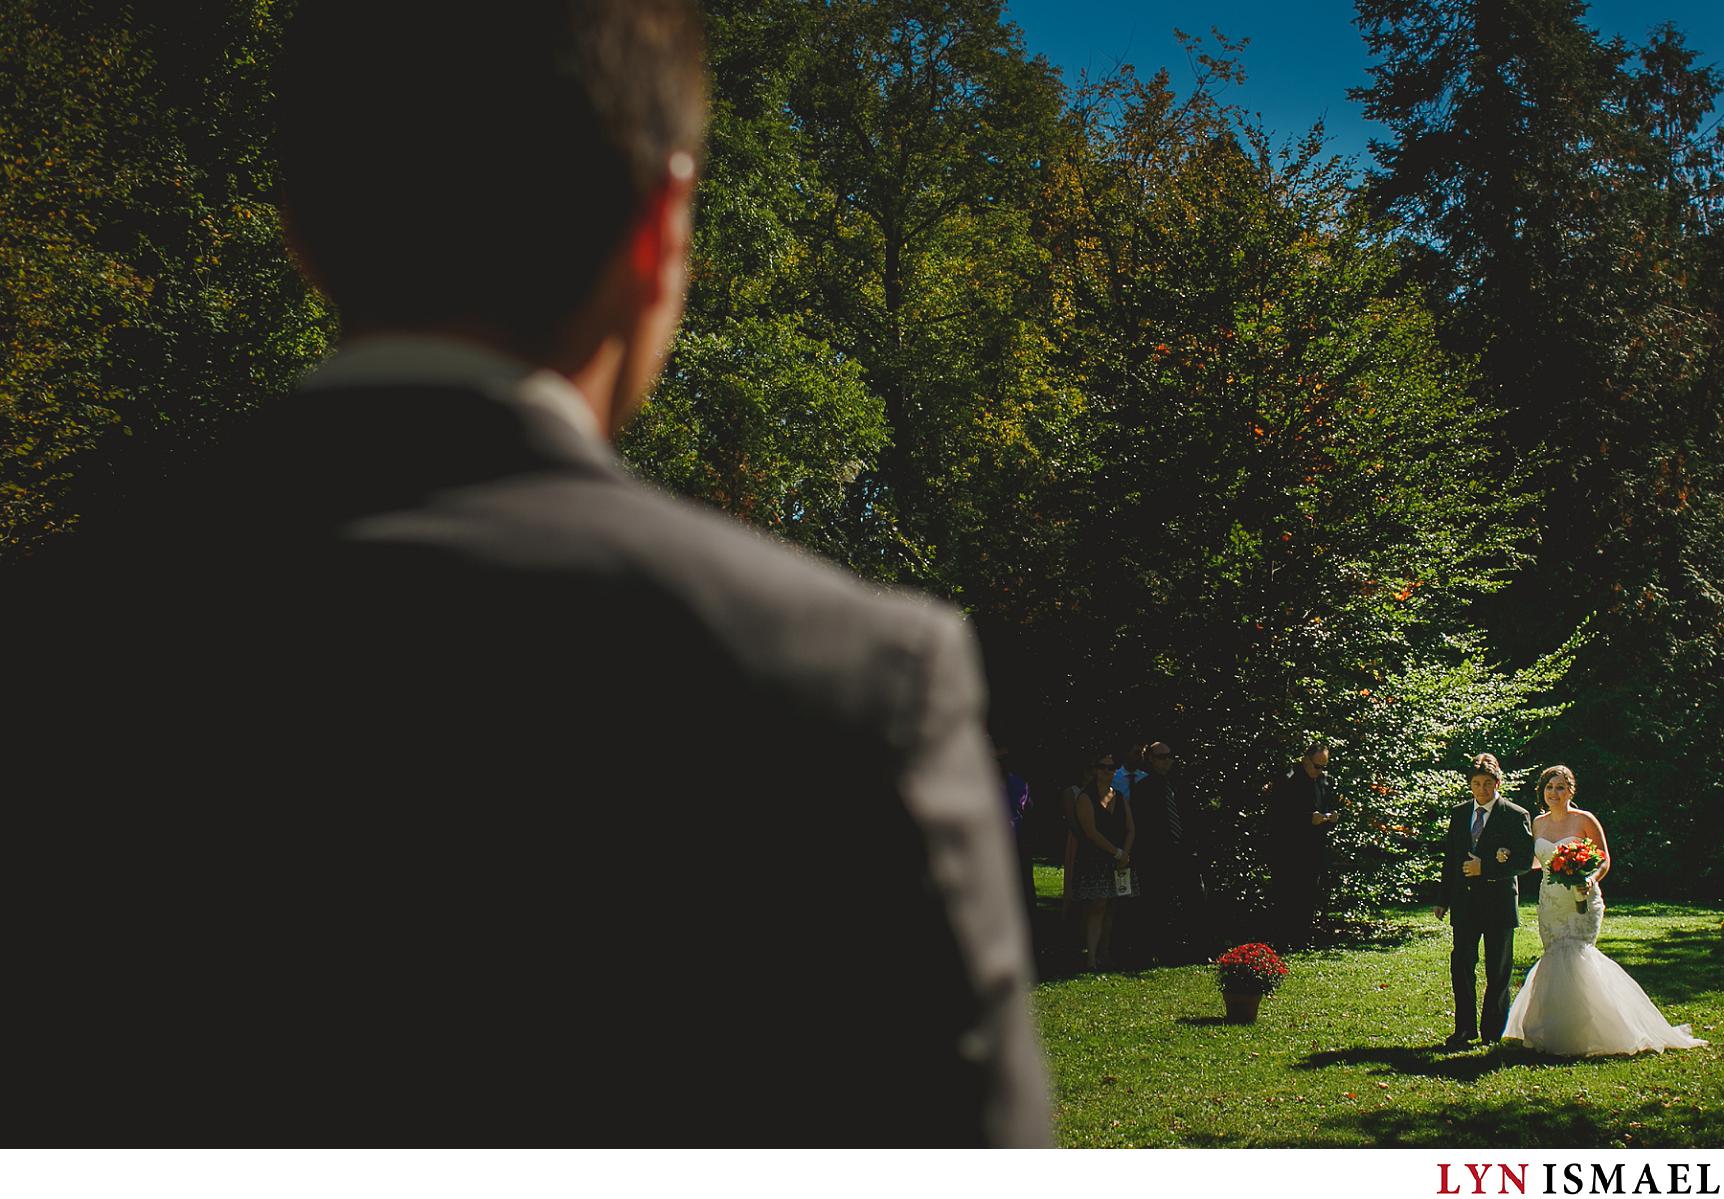 Groom watches his bride walk down the aisle at an outdoor wedding in Elora, Ontario.